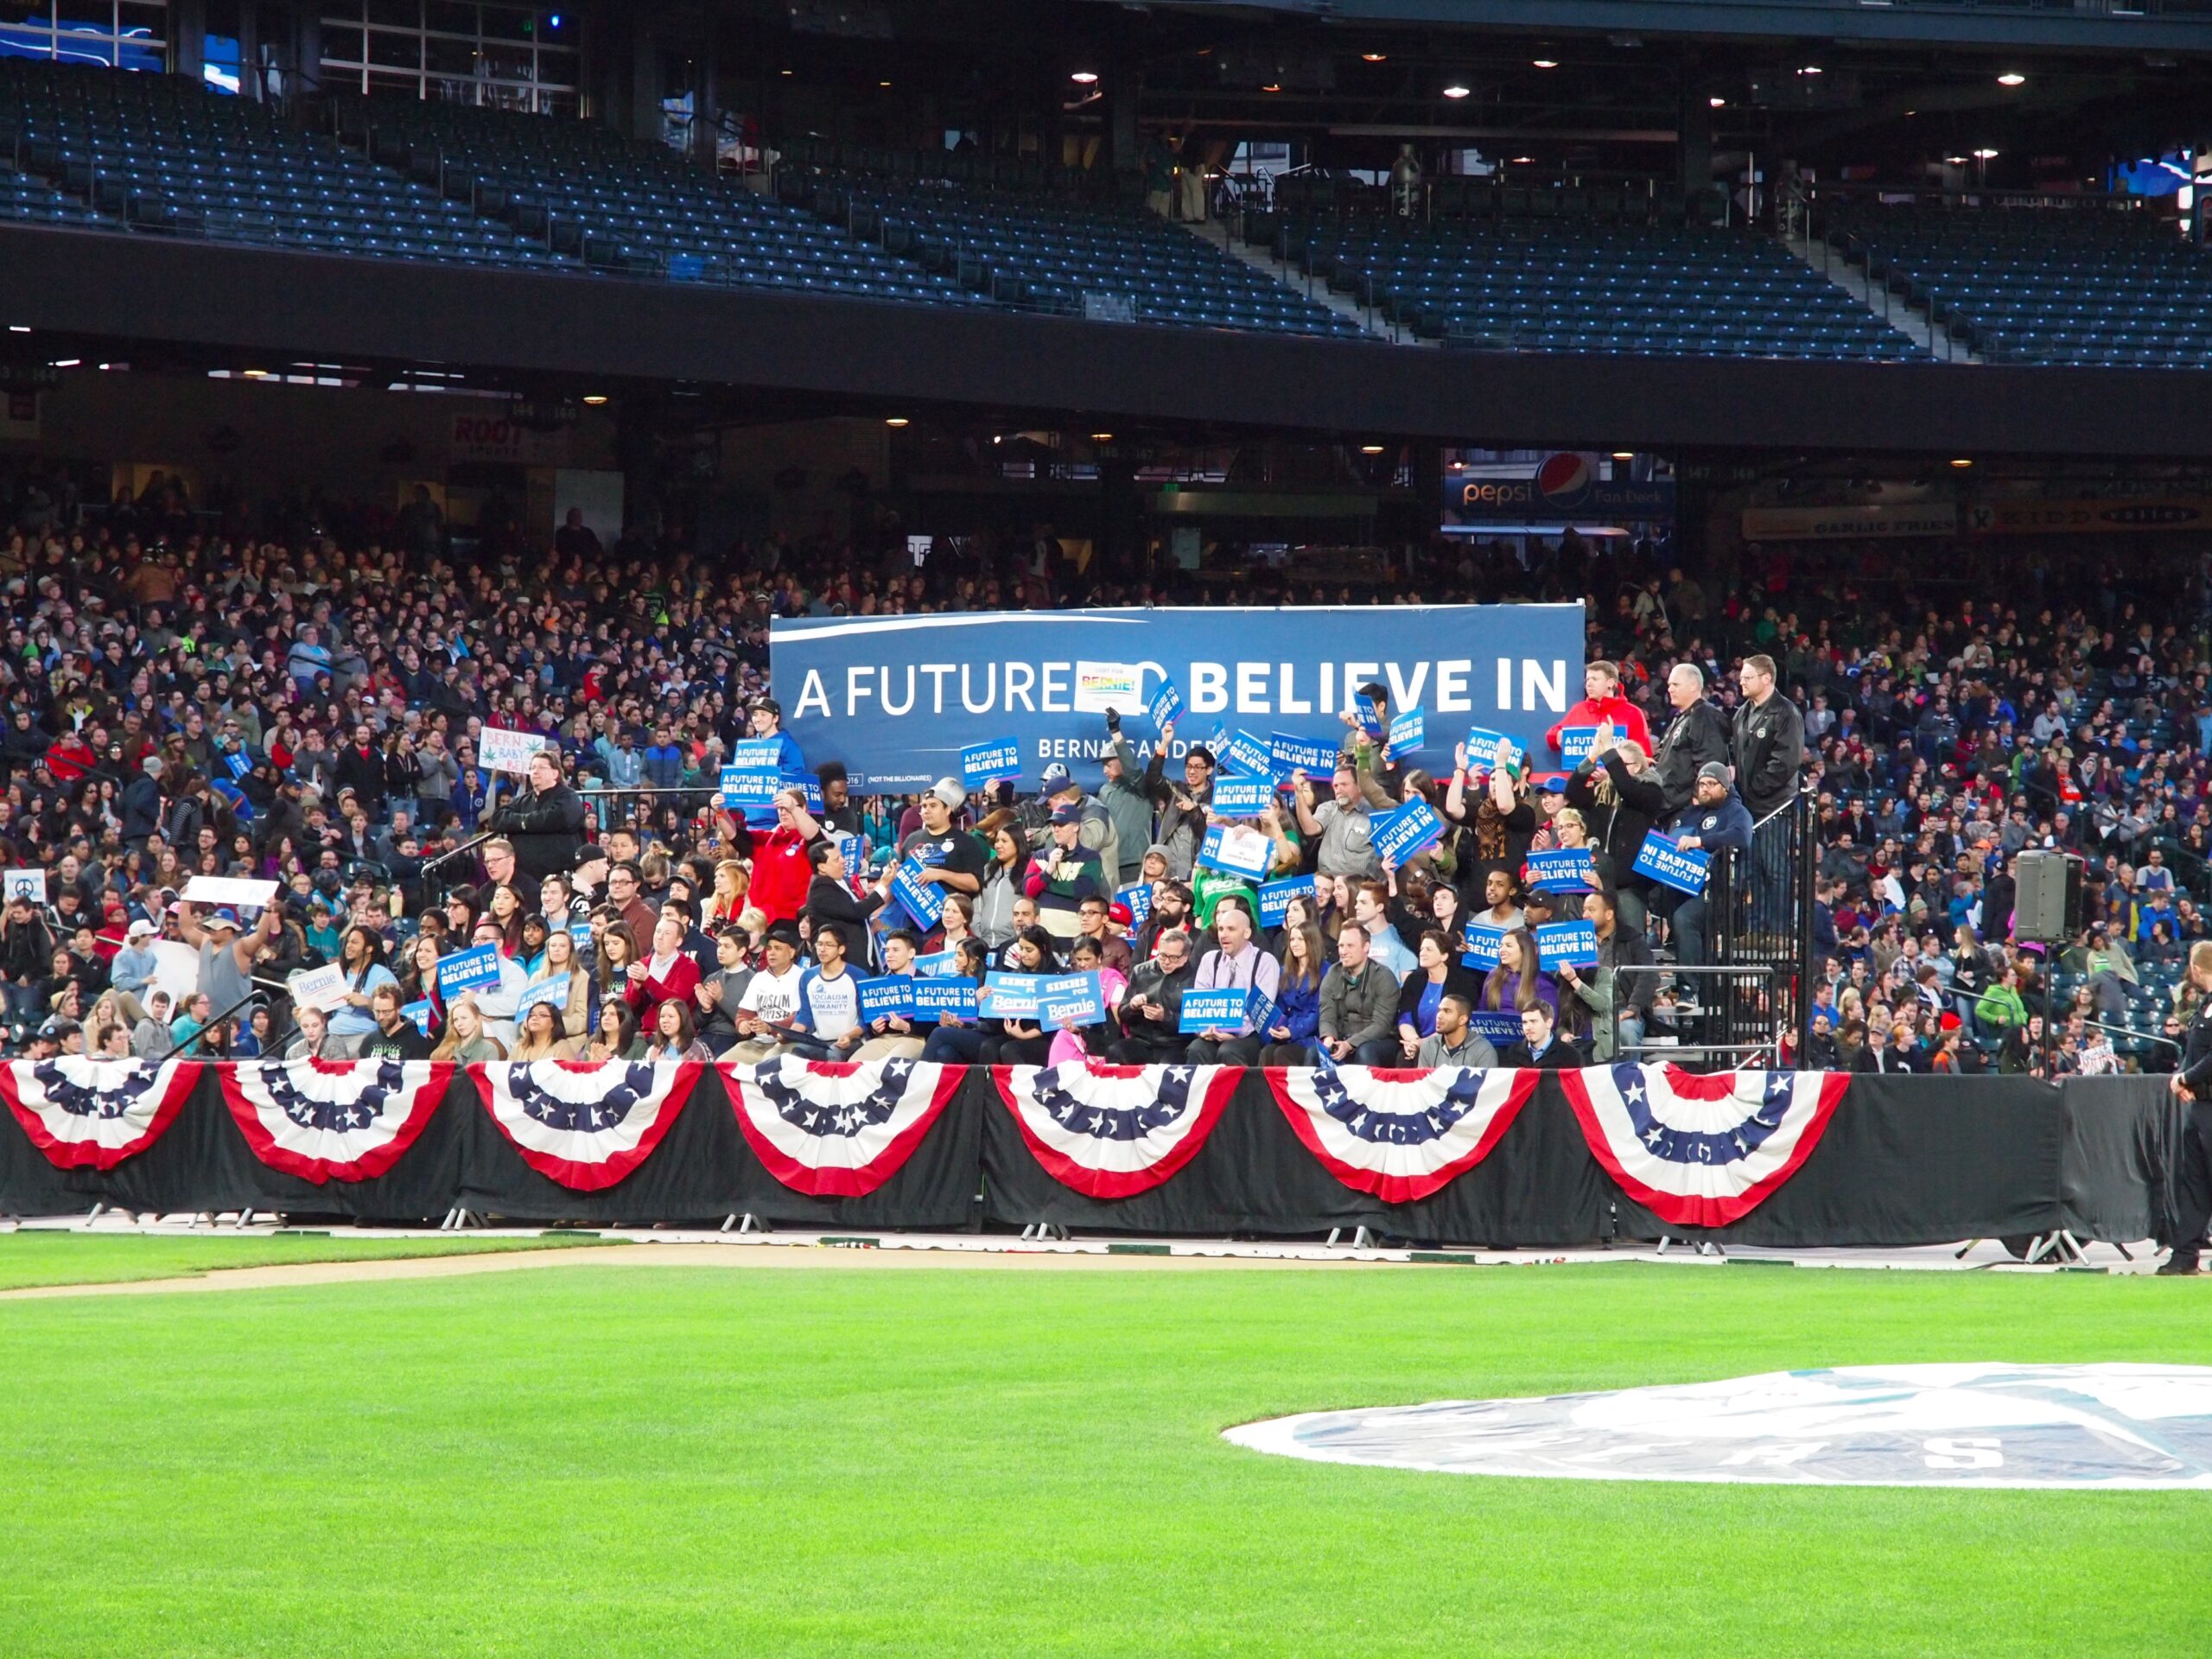 Bernie Sanders supporters at Safeco Field